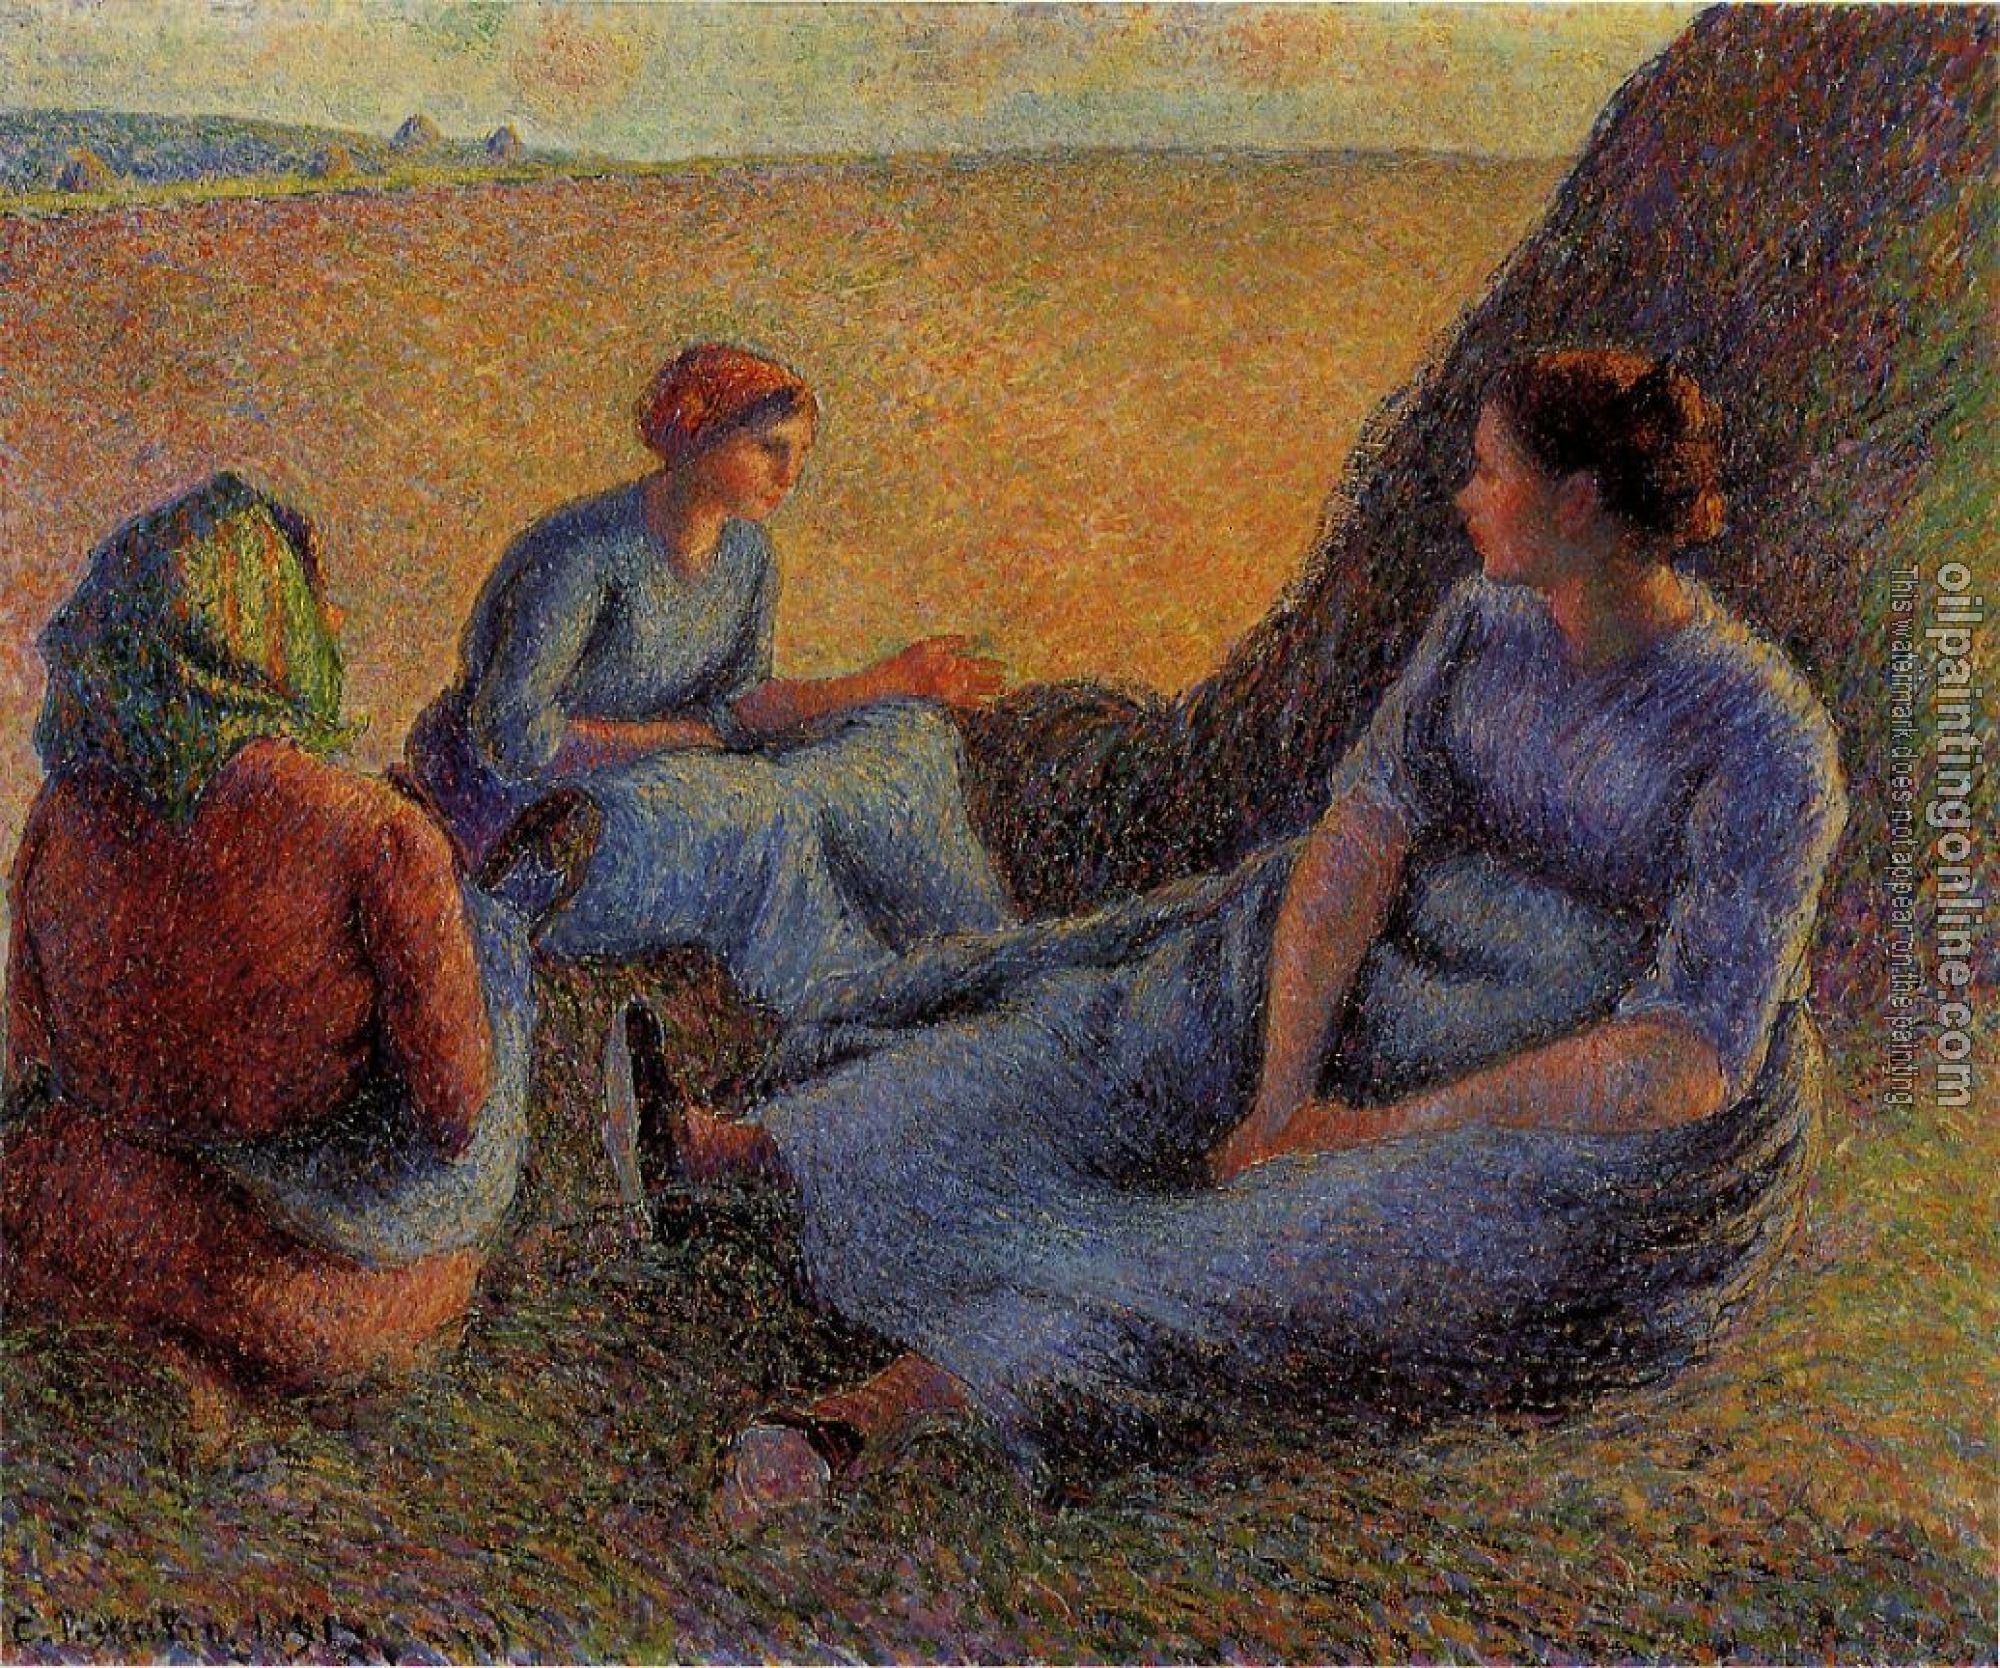 Pissarro, Camille - Haymakers at Rest